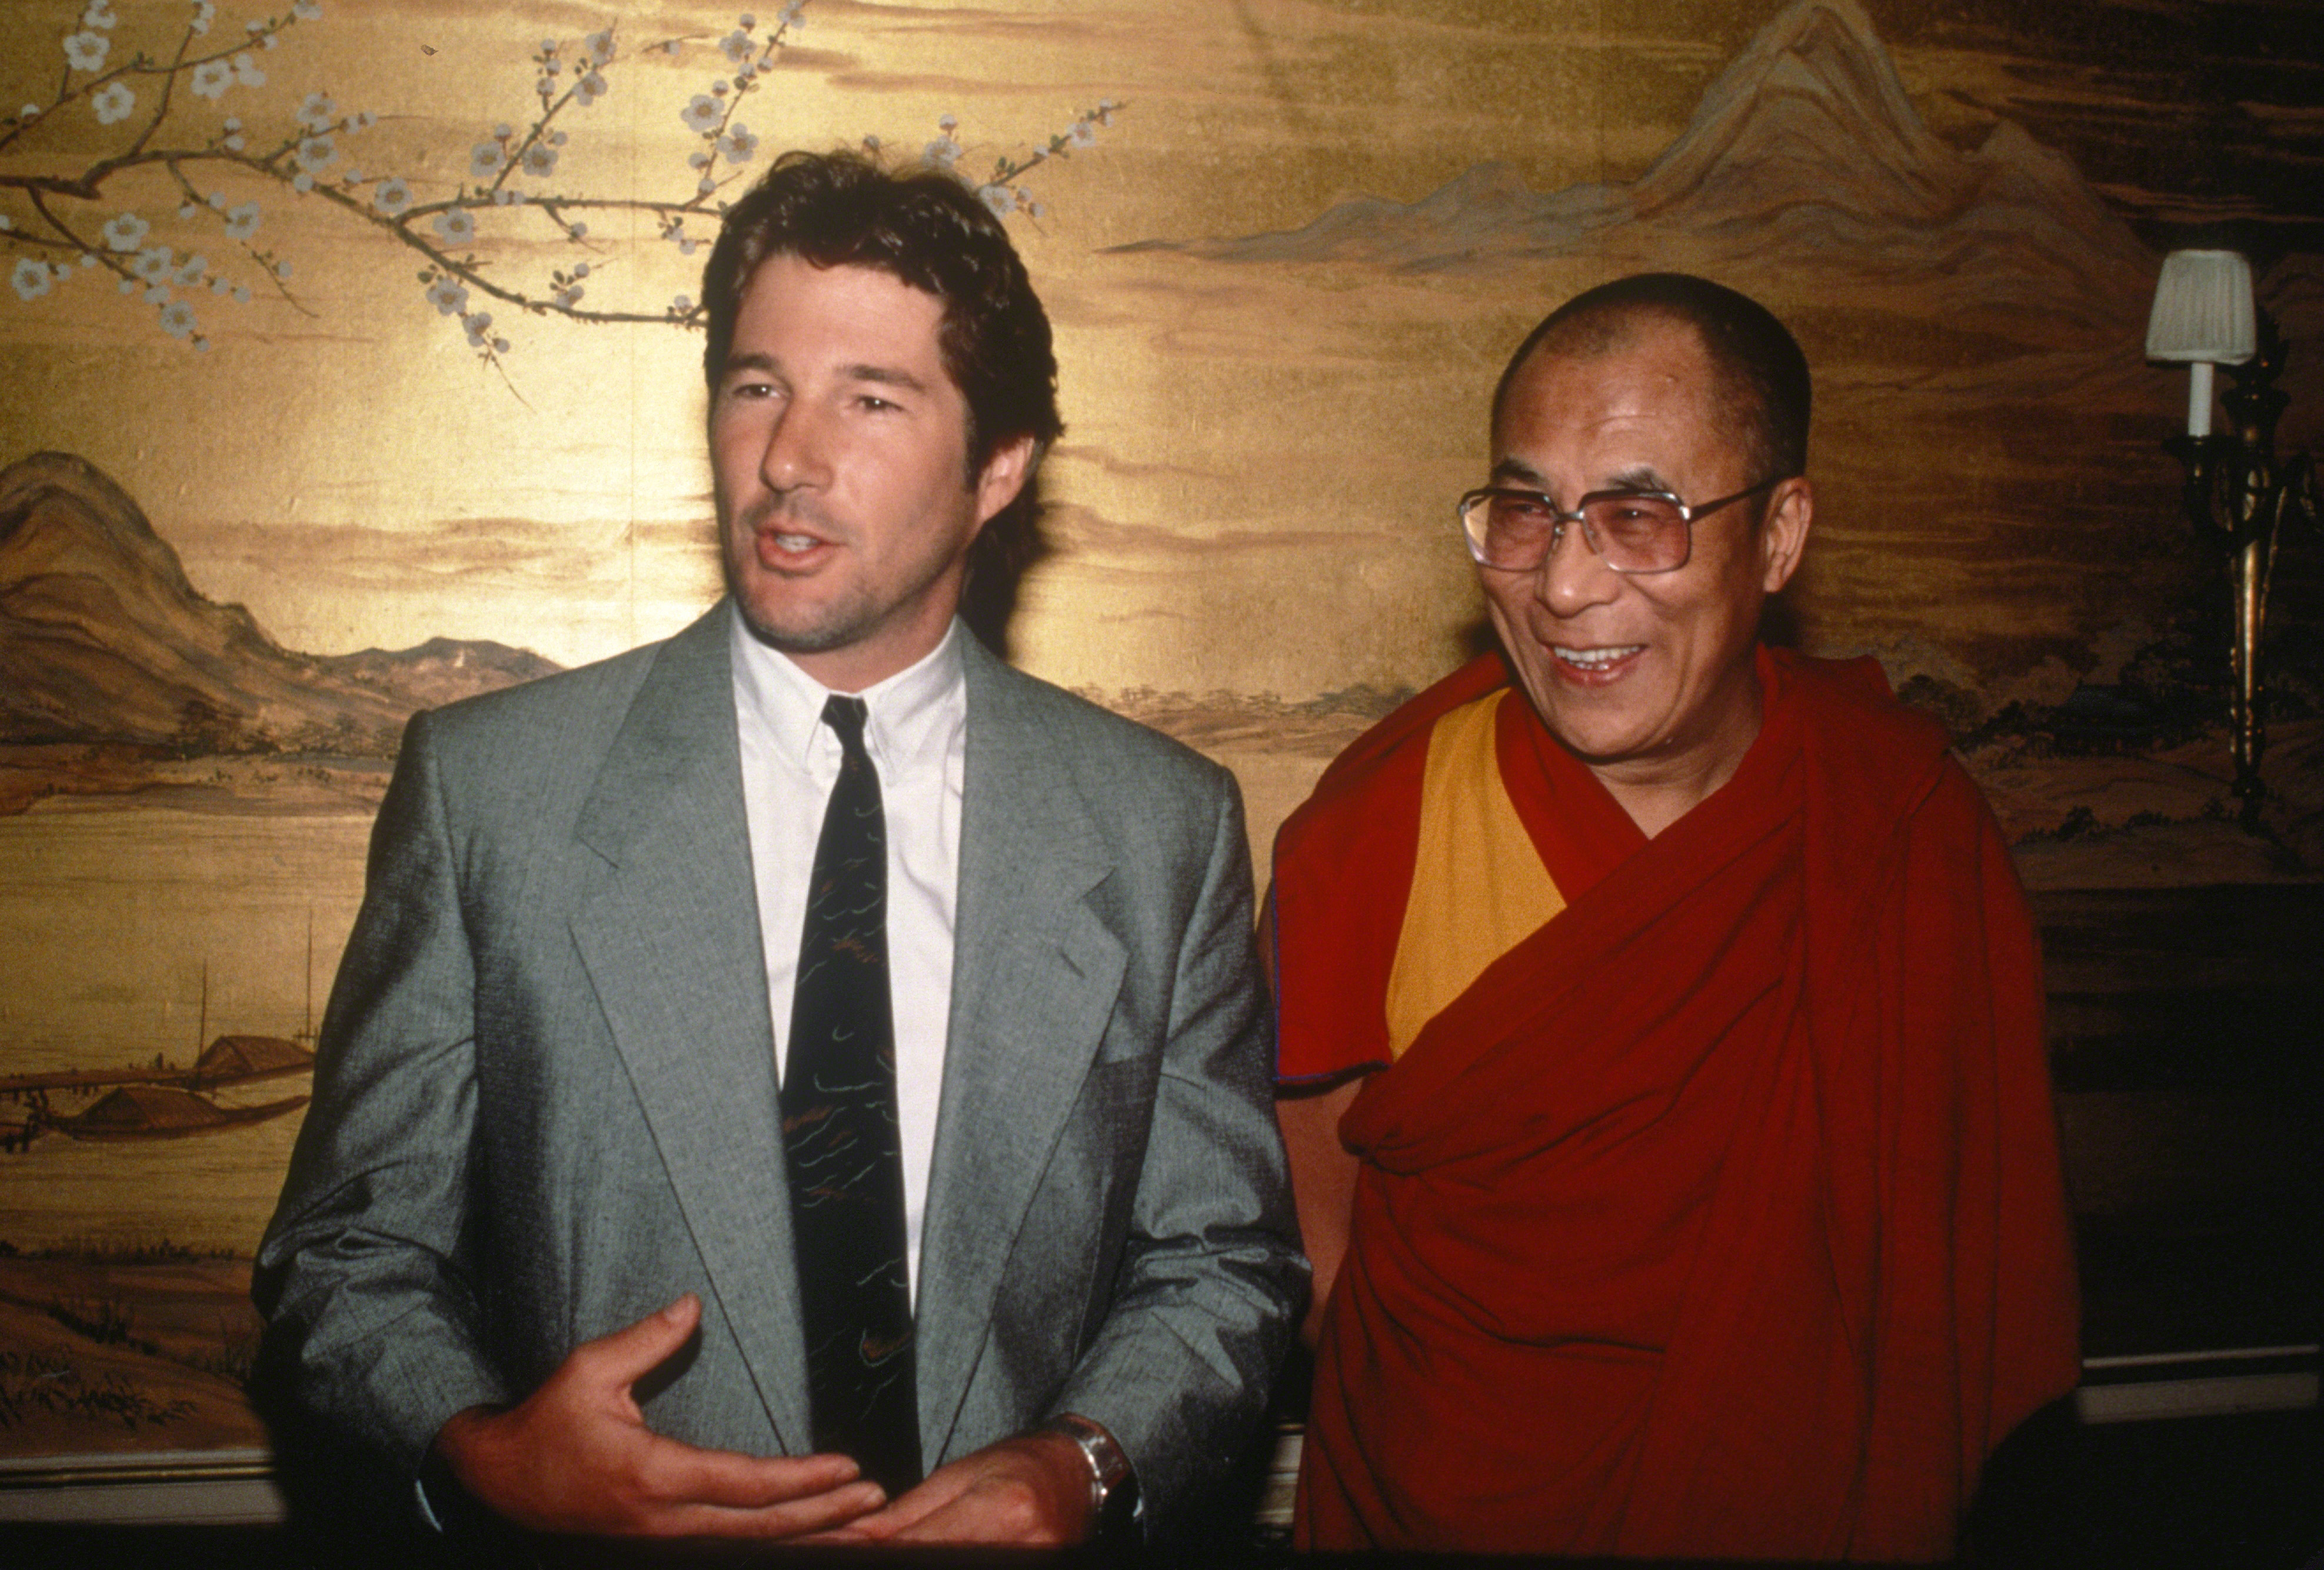 Richard Gere and the 14th Dalai Lama on January 1, 1987 in New York City. | Source: Getty Images